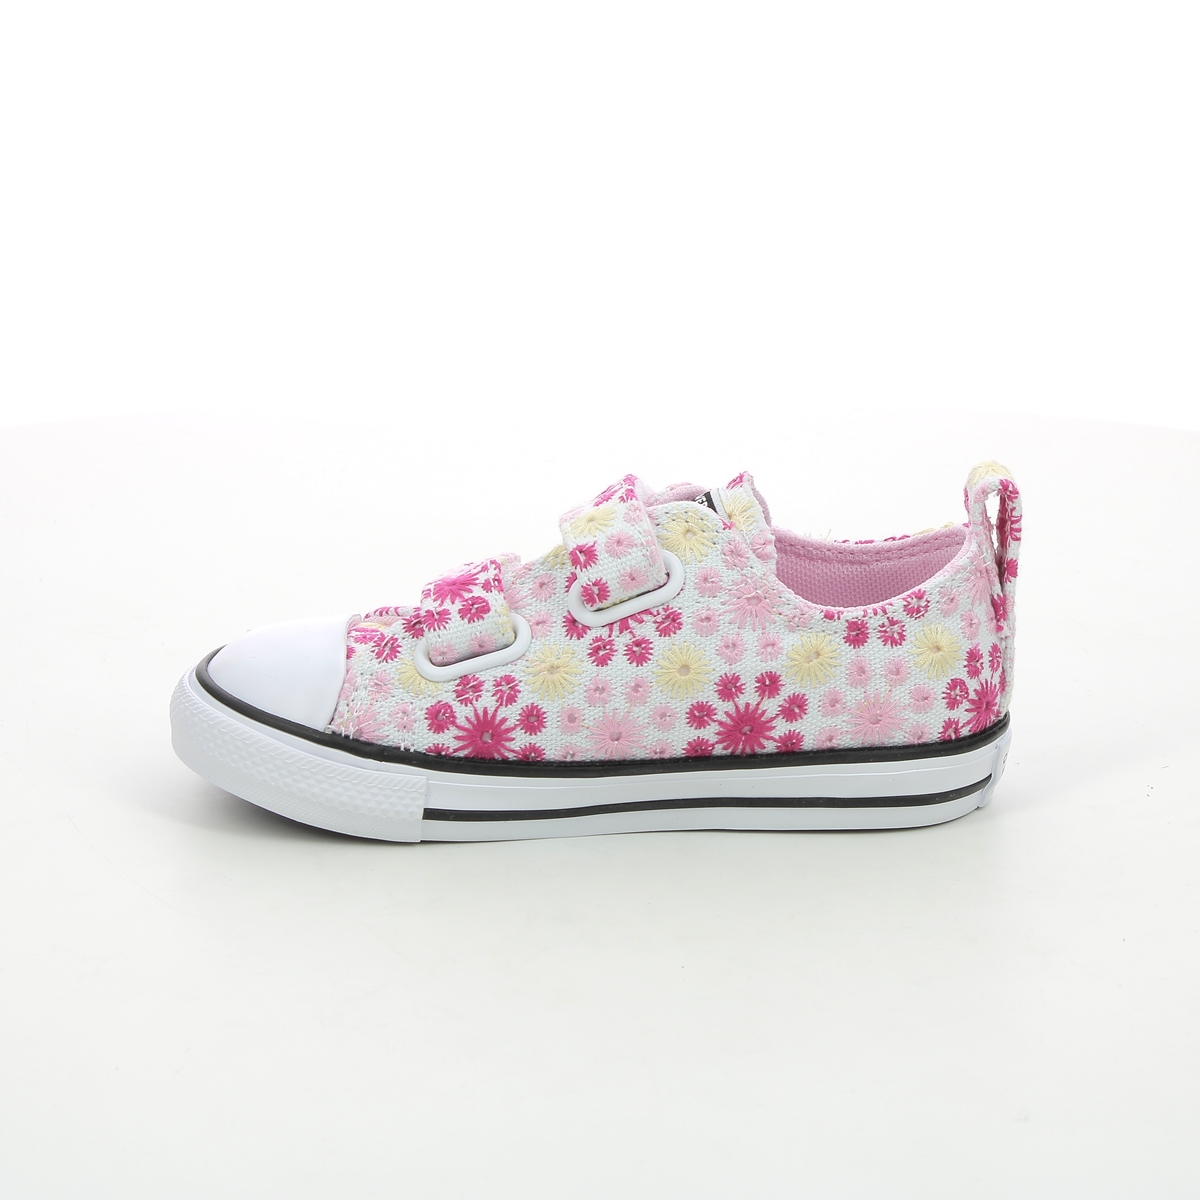 Converse Broderie 2v 771288C-005 Pink toddler girls trainers